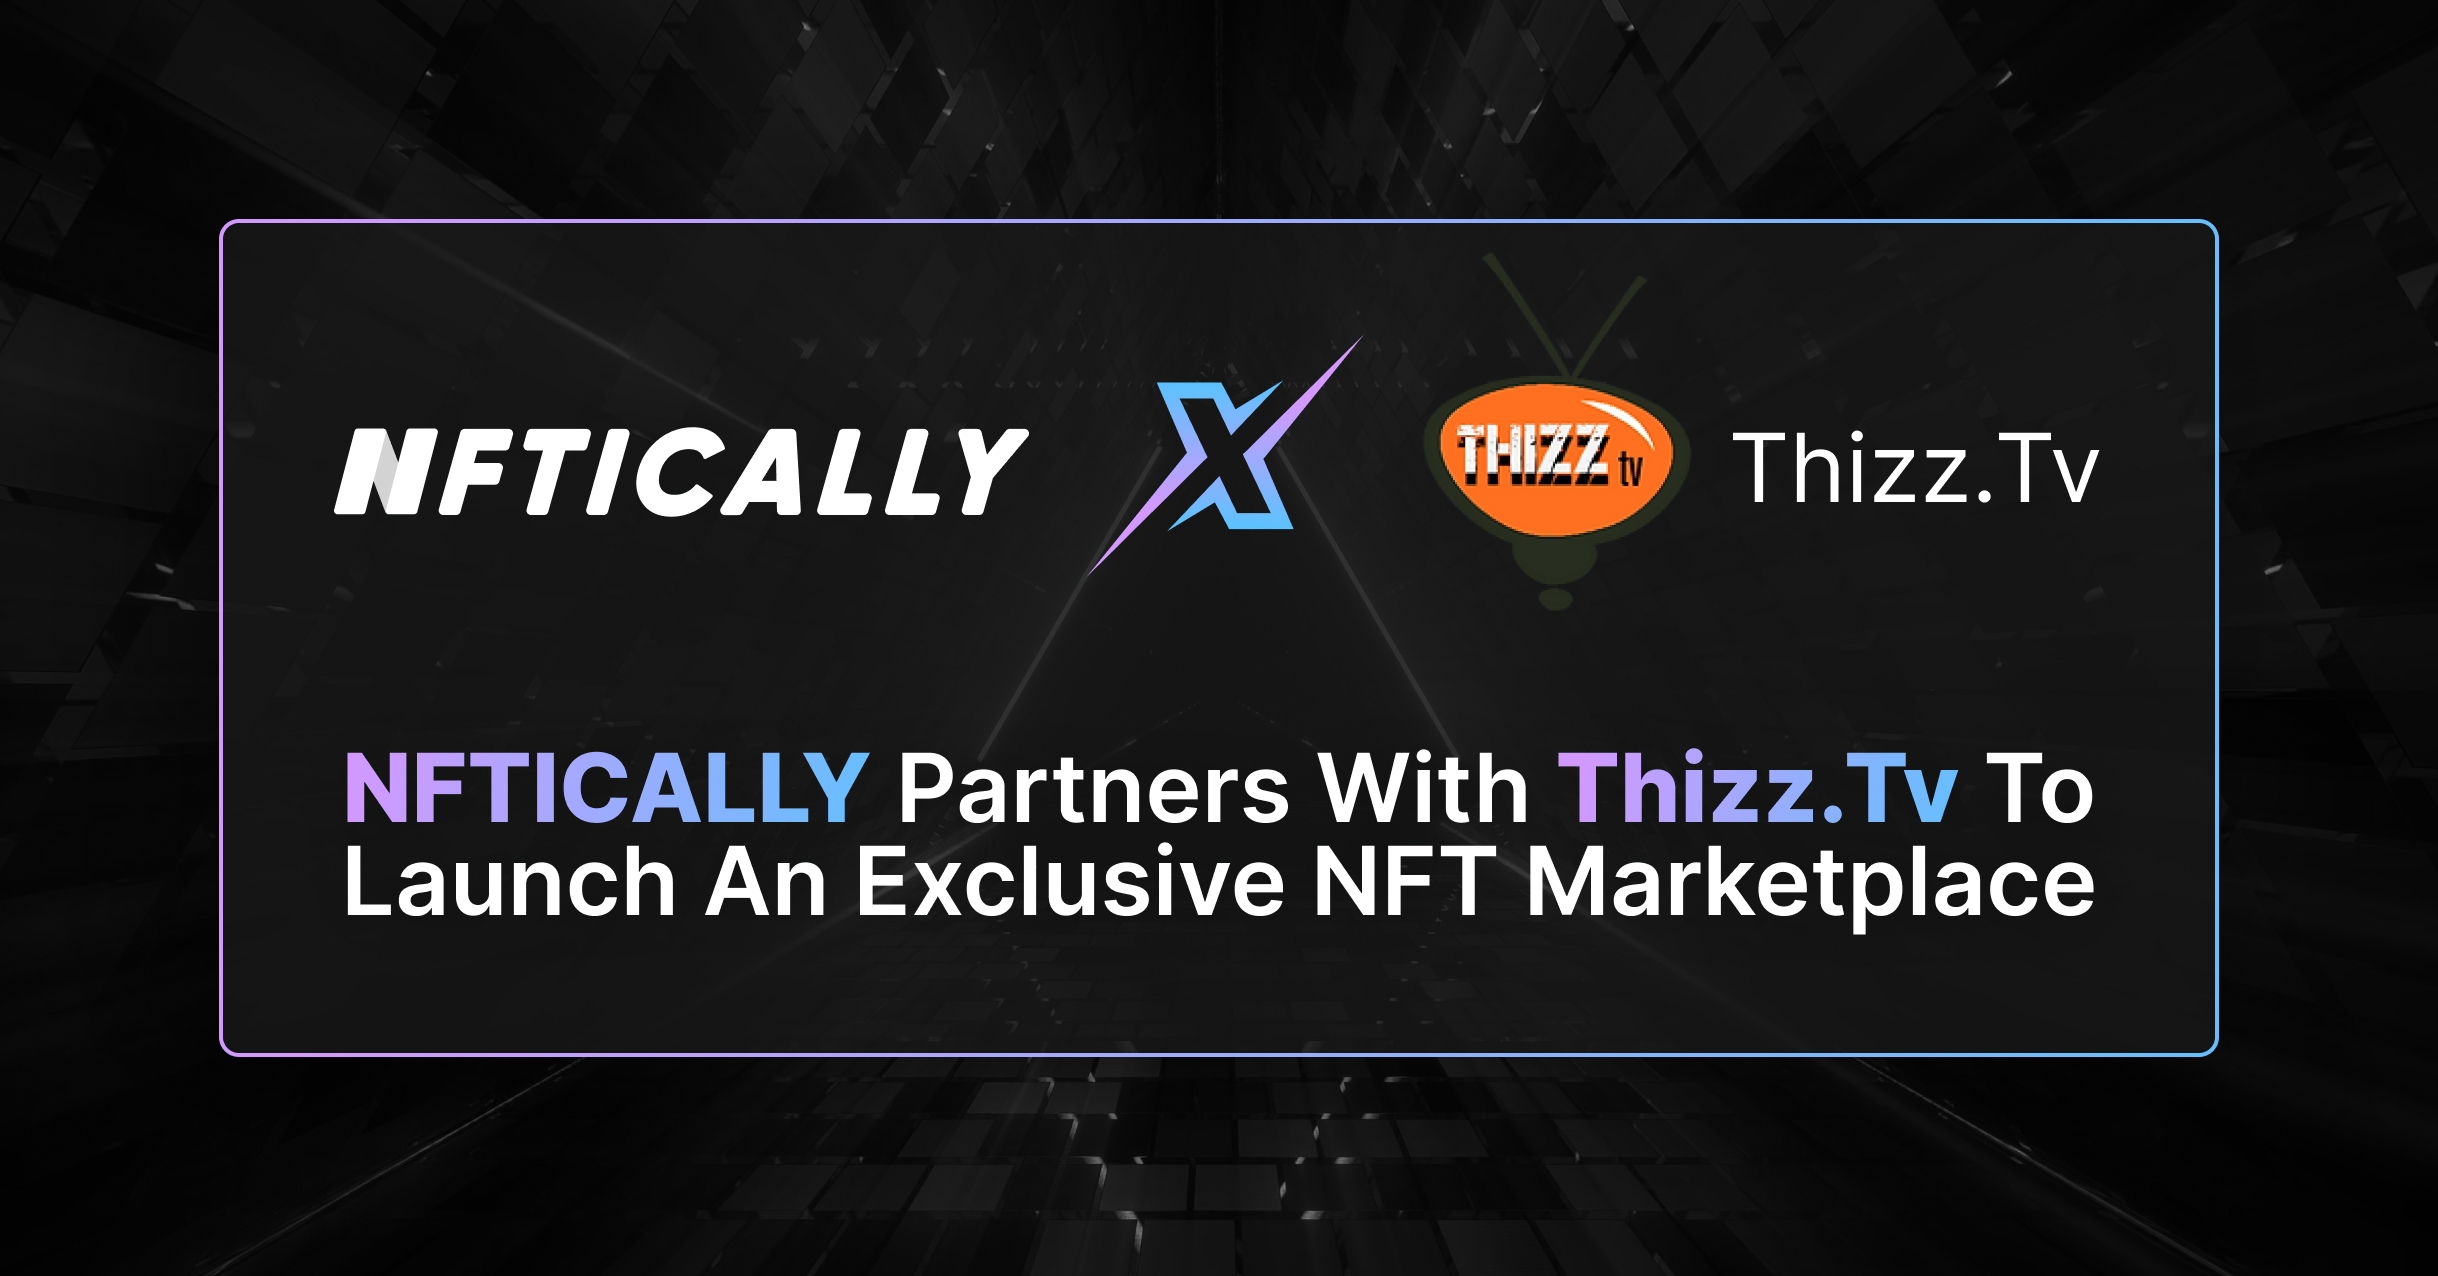 NFTICALLY partners with Thizz.tv to launch an exclusive NFT Marketplace